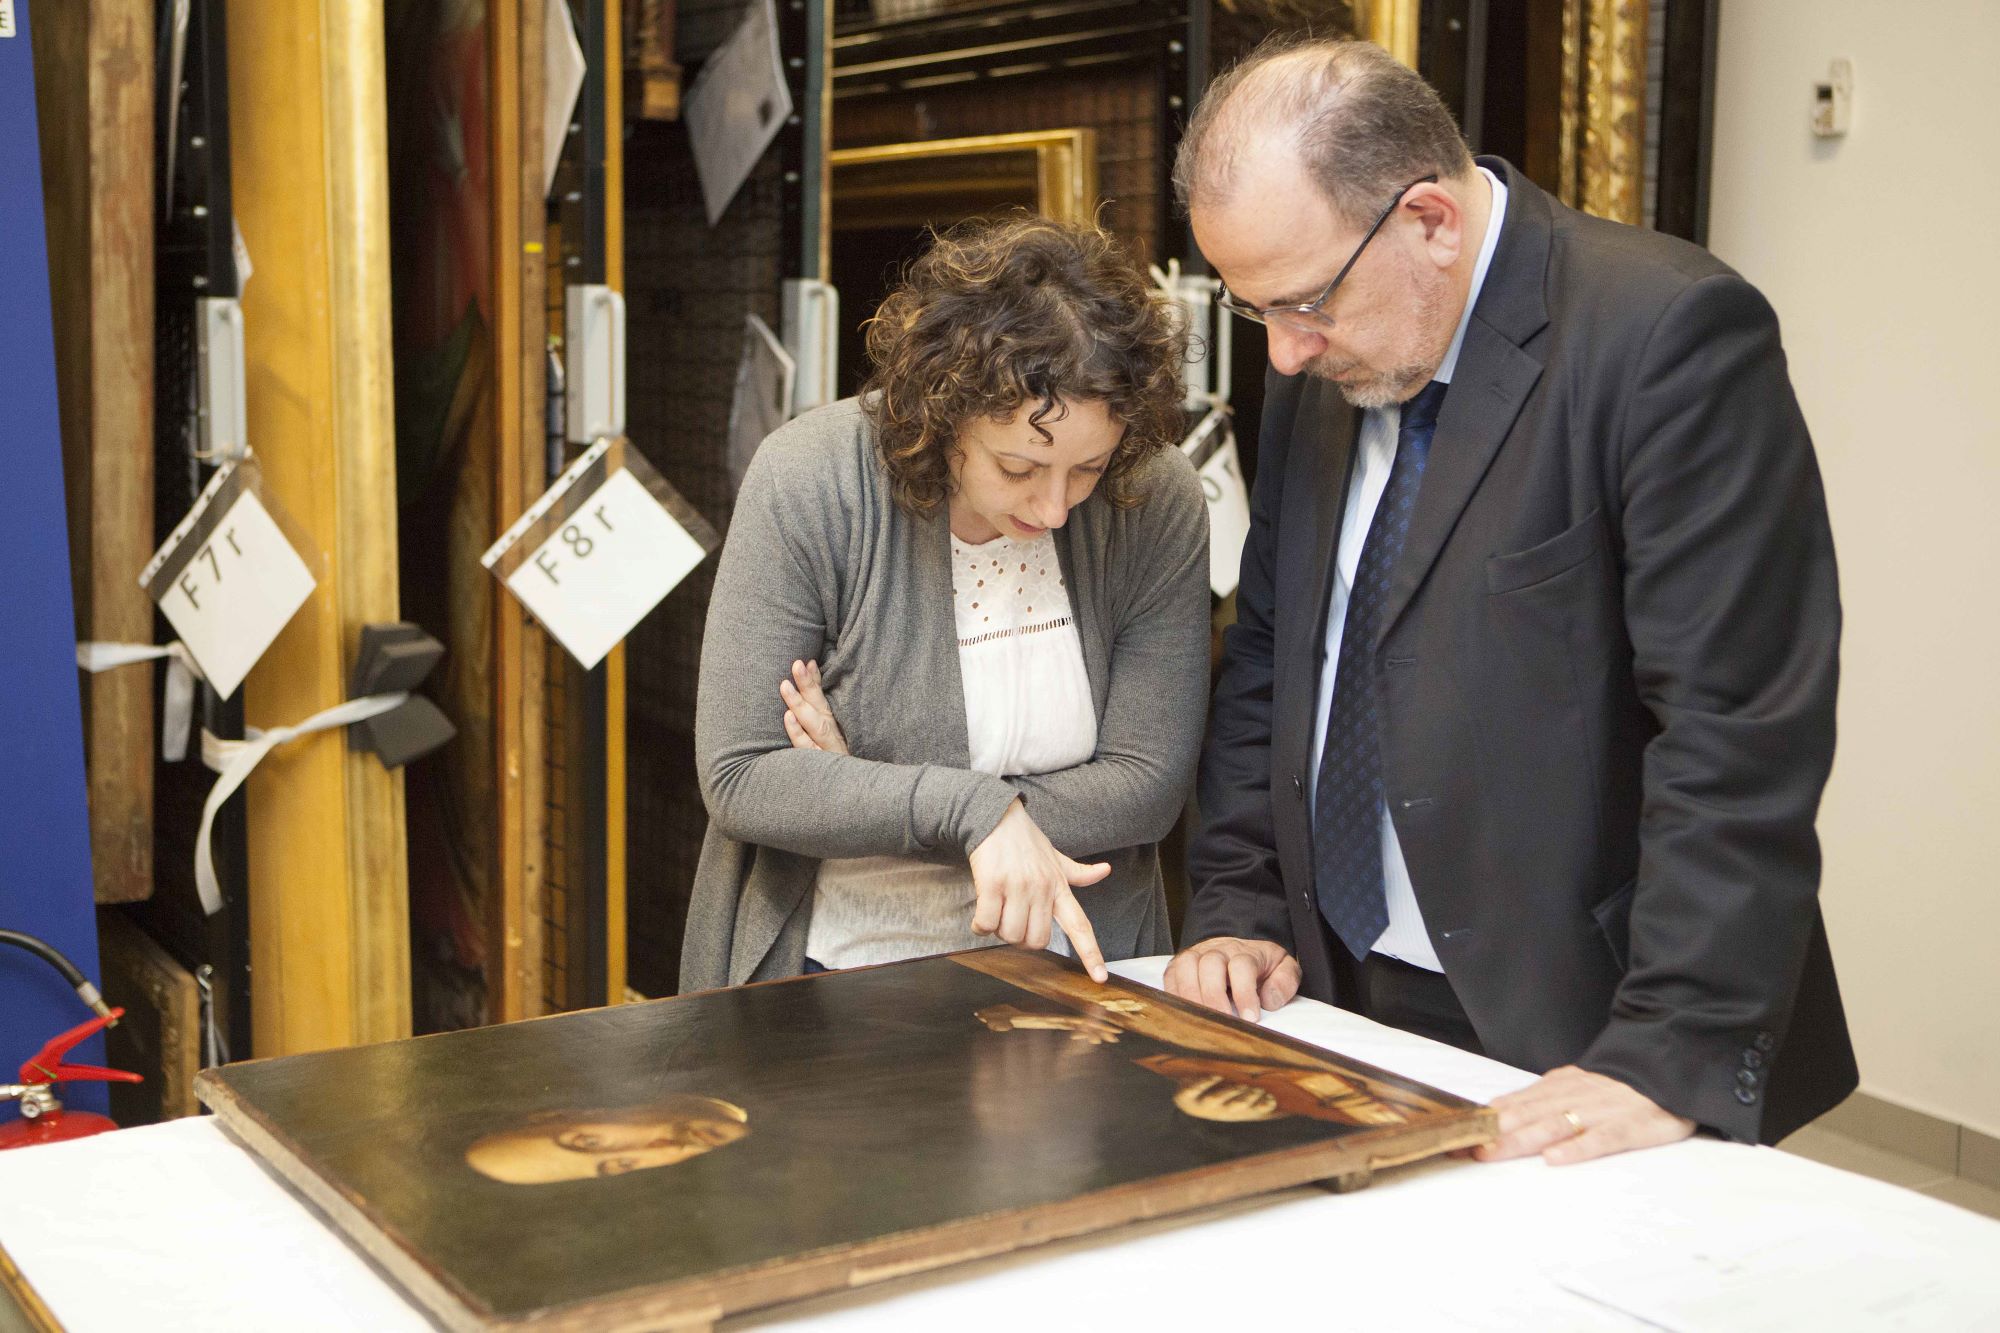 Man restoring an ancient piece of art with the guidance of a restaurator Luca Jahier, president of the European Economic and Social Committee at the Royal Museums, Turin © Image: Daniele Bottallo